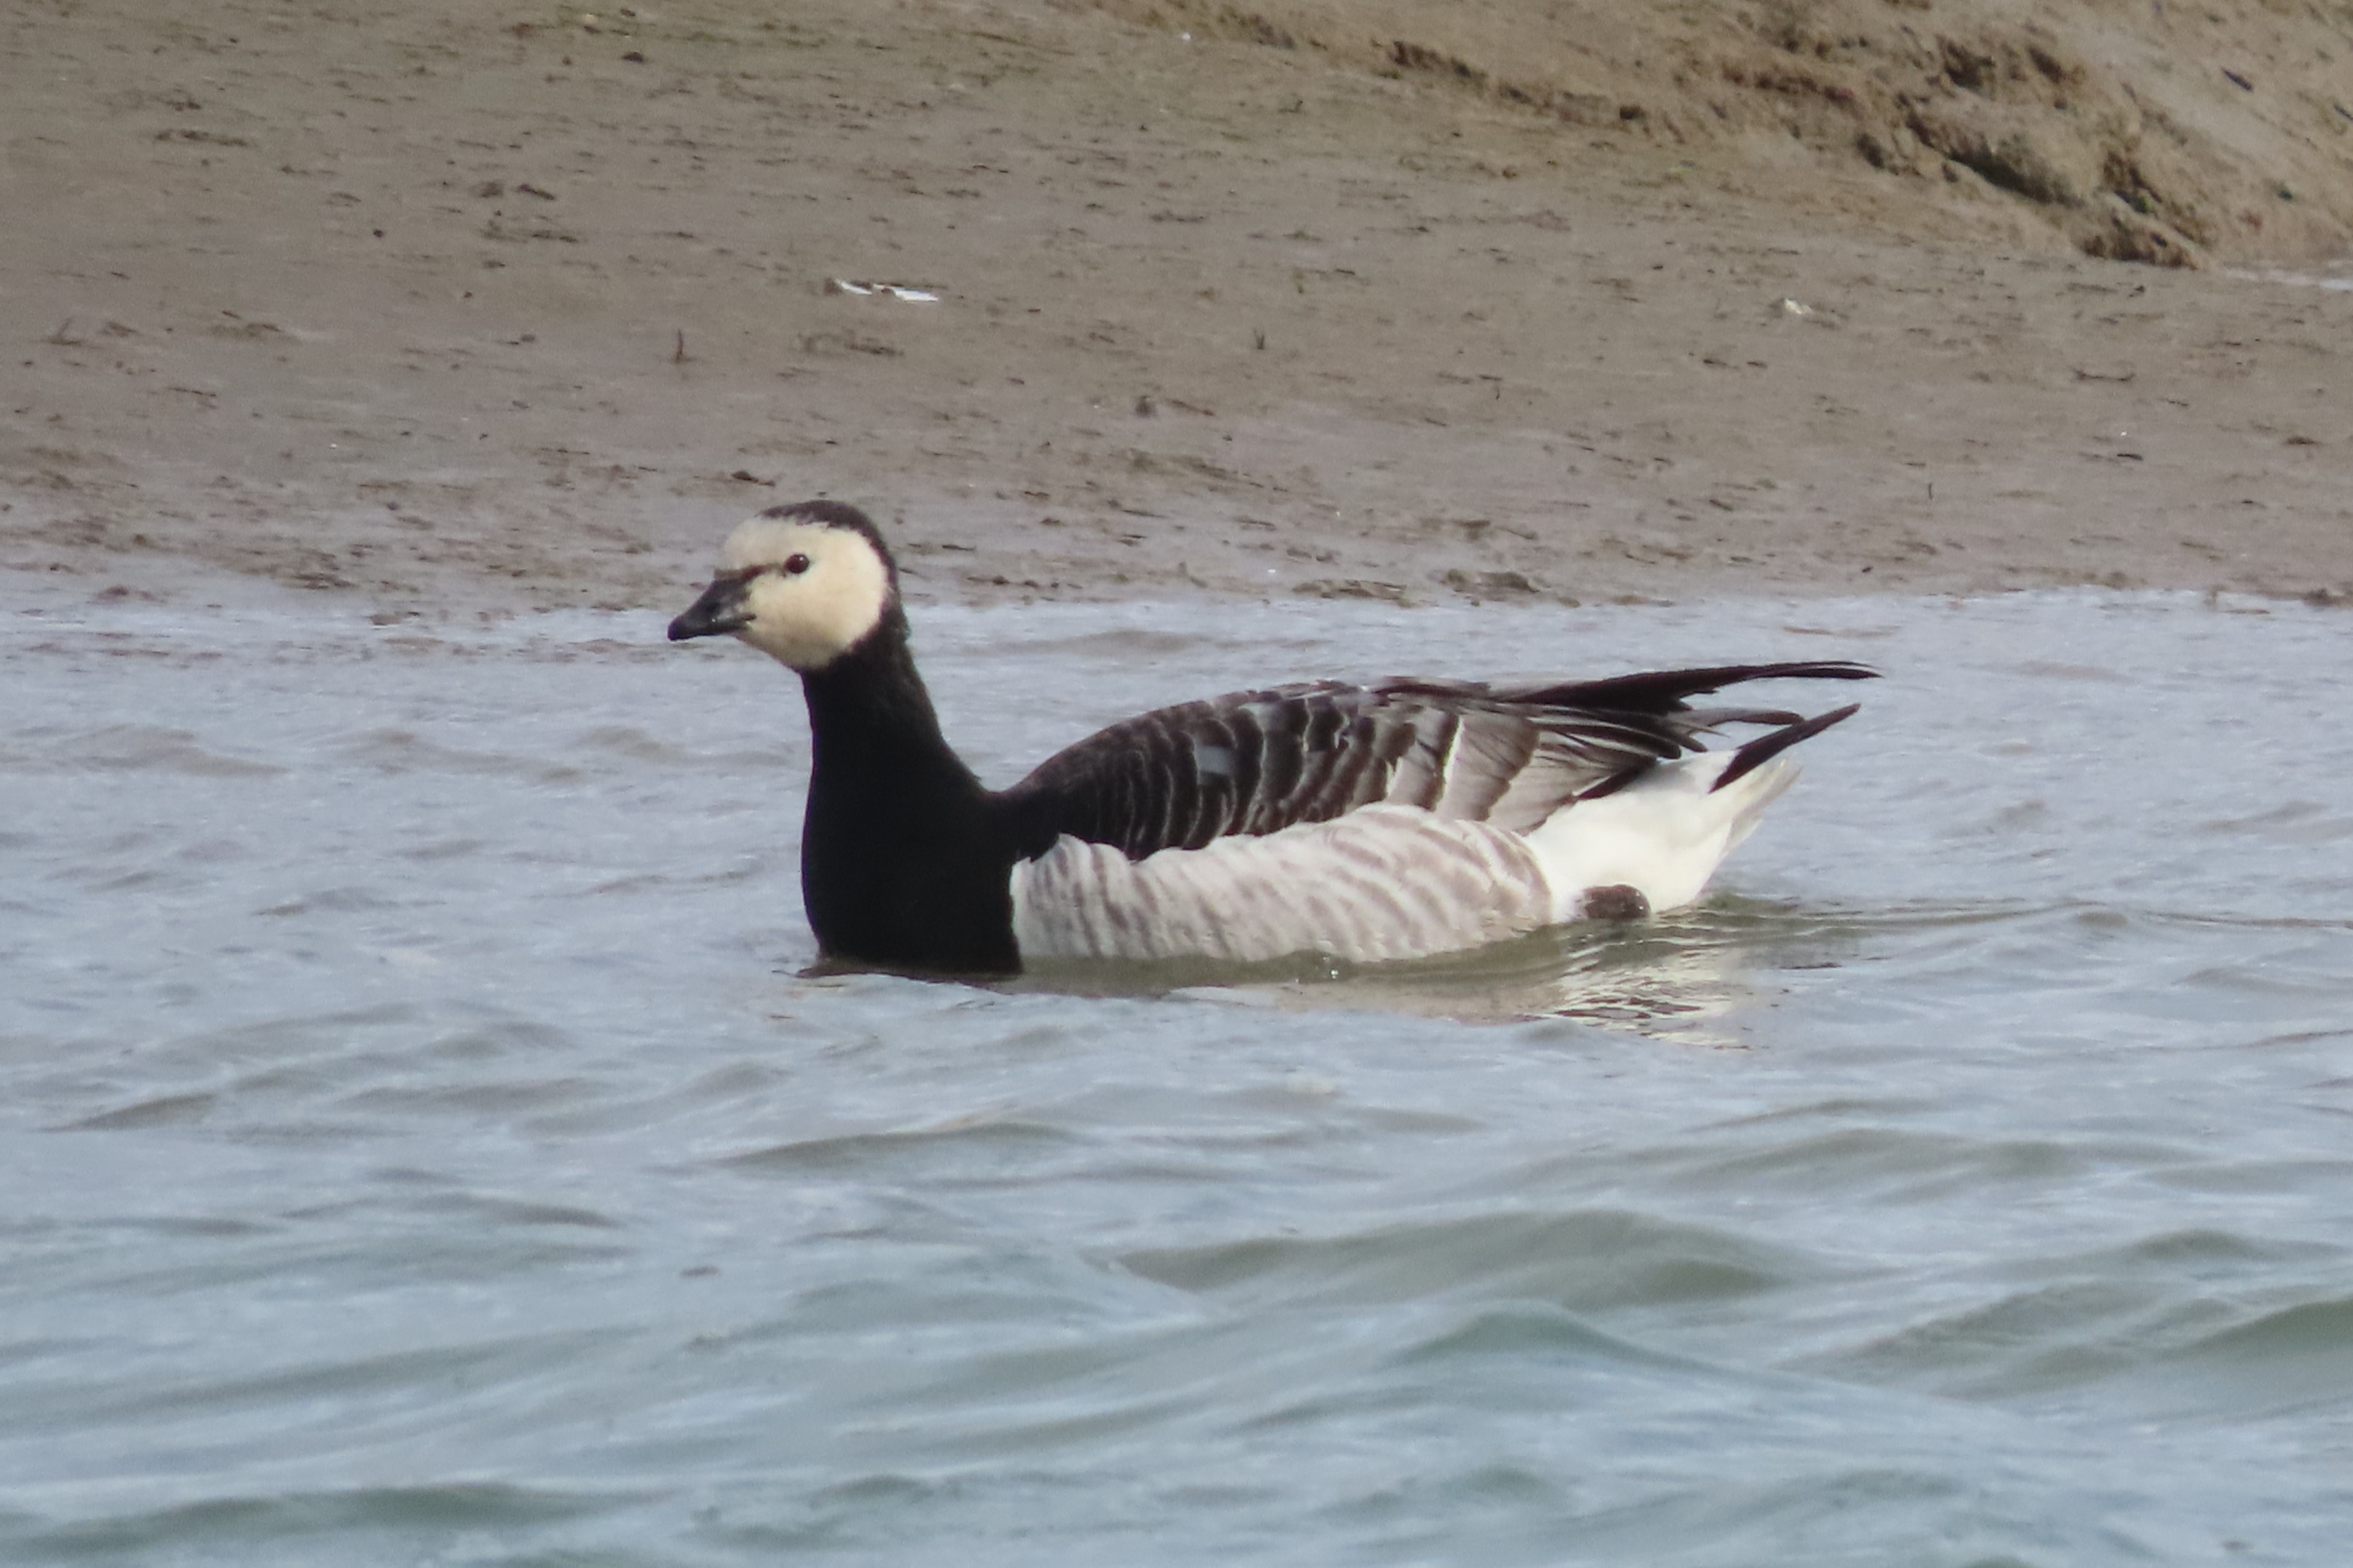 Birding the Selsey Peninsula: 14th - 16th March 2021